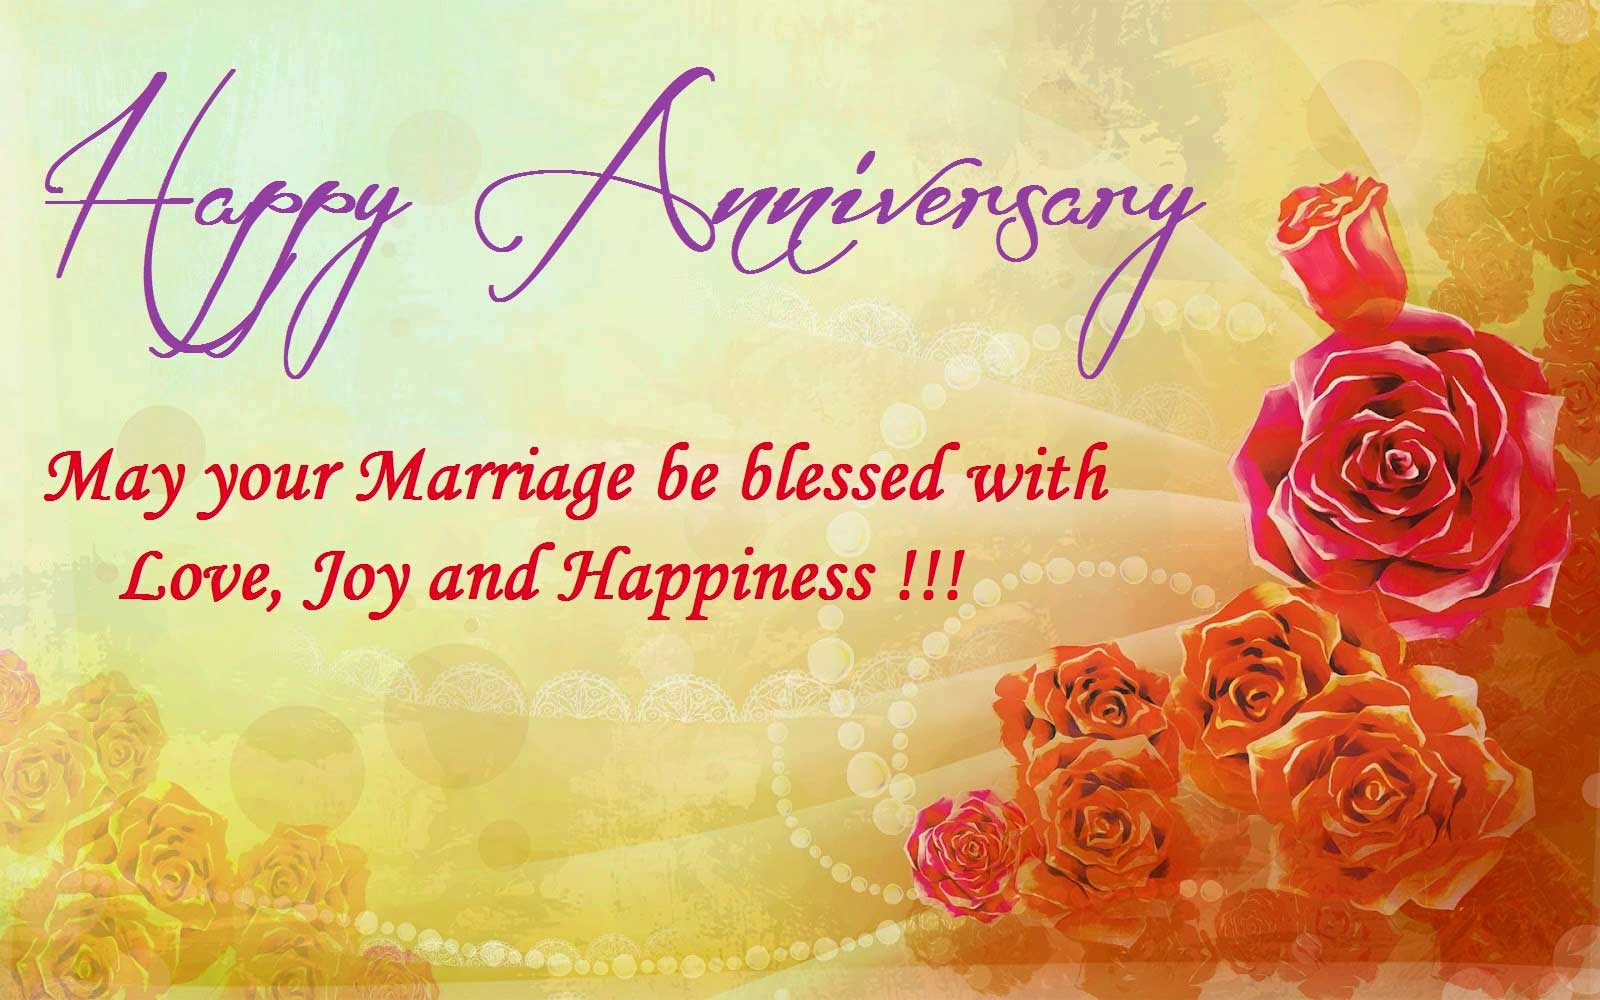 Wedding Anniversary Wishing Quotes
 Happy Anniversary Quotes and Wishes